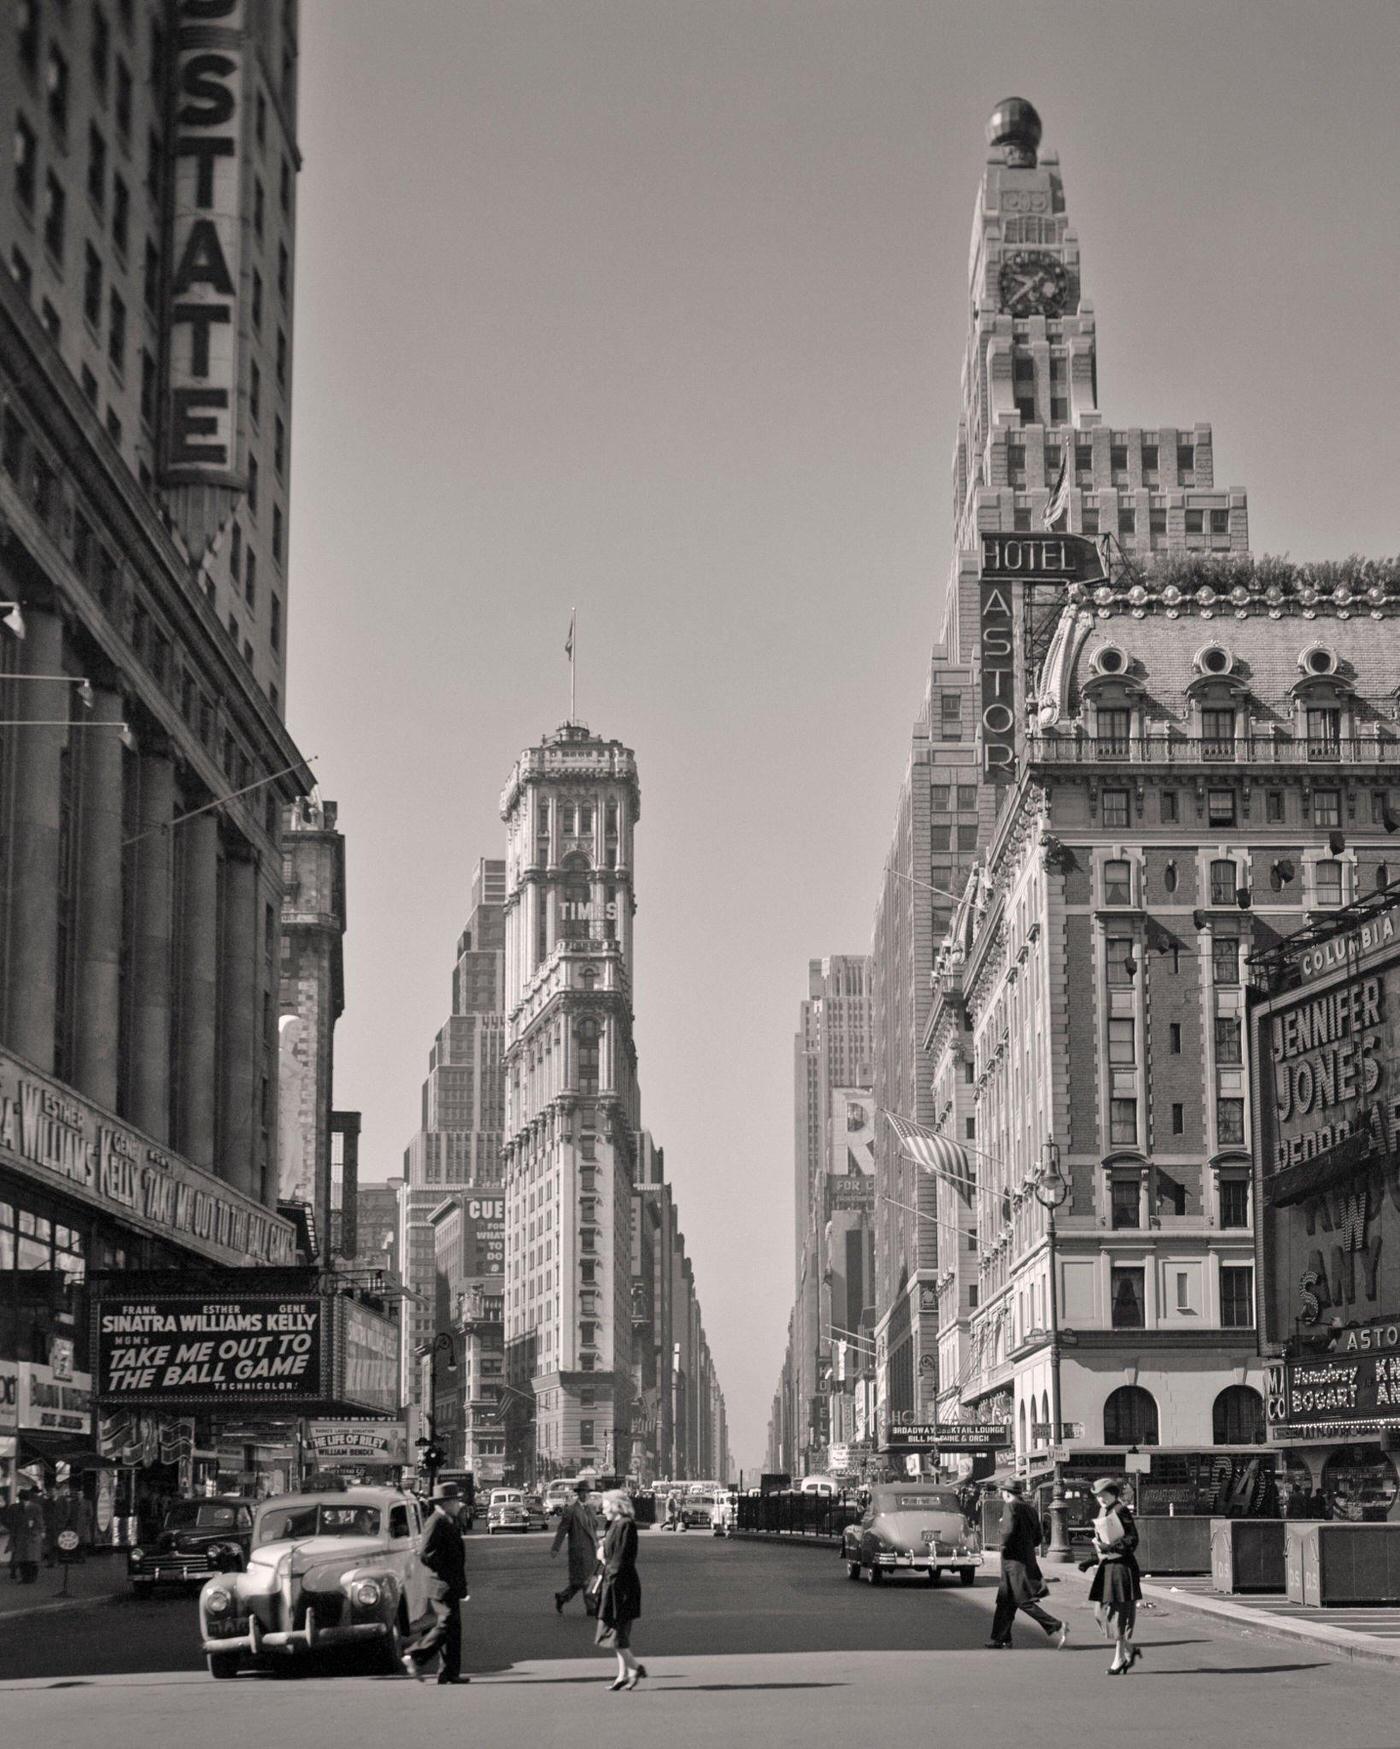 Looking South Towards Times Square In Midtown, Manhattan, 1940S